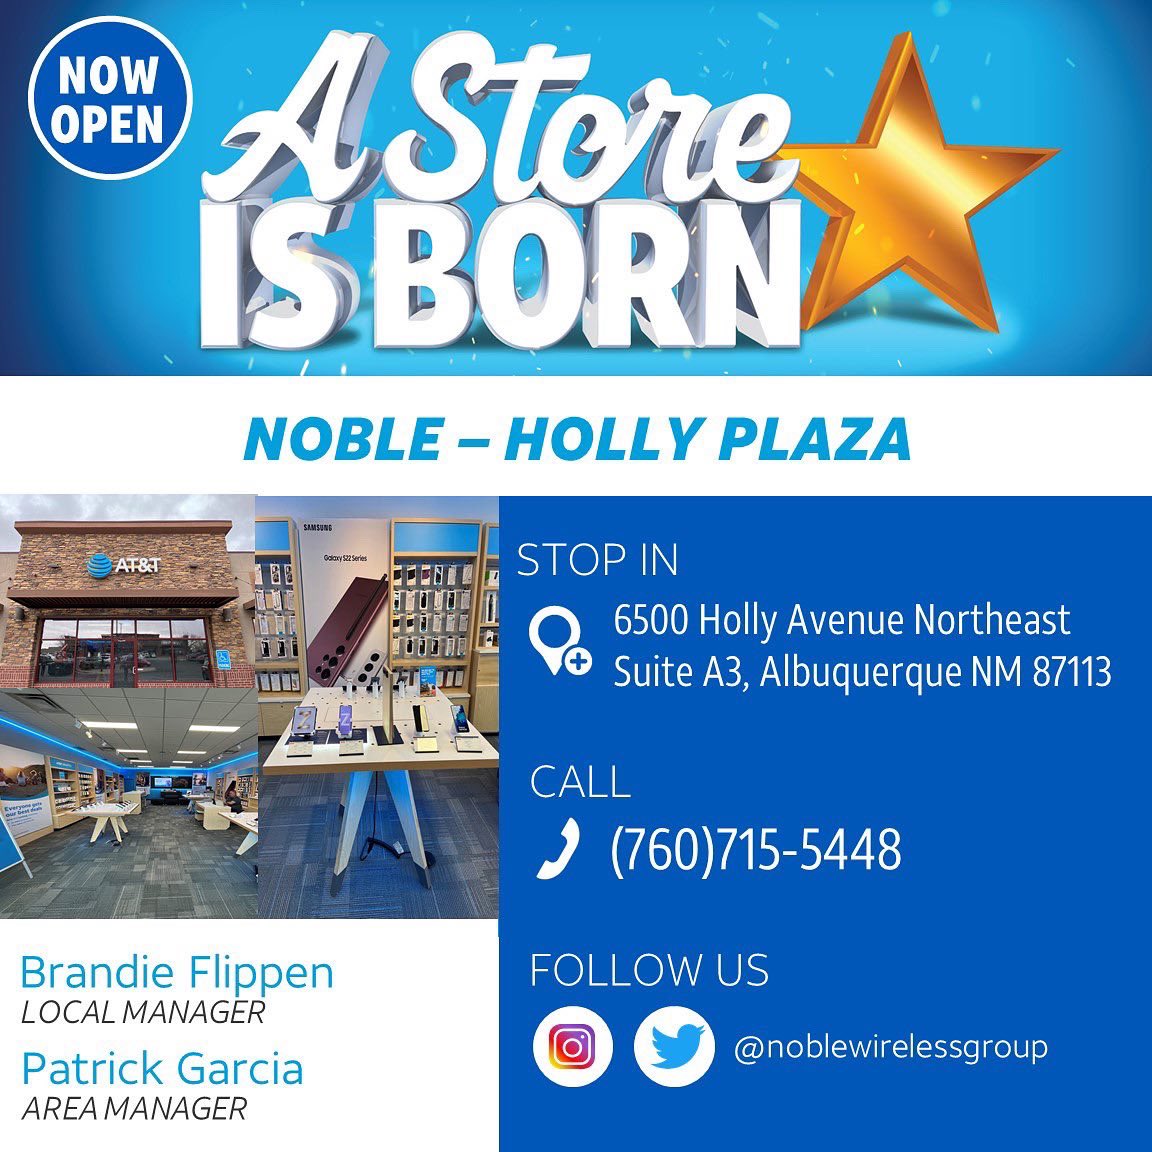 ⭐️⭐️ A Store is Born ⭐️⭐️

Congratulations to Noble for opening their 2nd and 3rd locations in New Mexico!! Looking forward to your continued growth! 
⭐️⭐️⭐️⭐️⭐️⭐️⭐️⭐️⭐️⭐️⭐️⭐️
#G2NH #noblewireless #newlocations